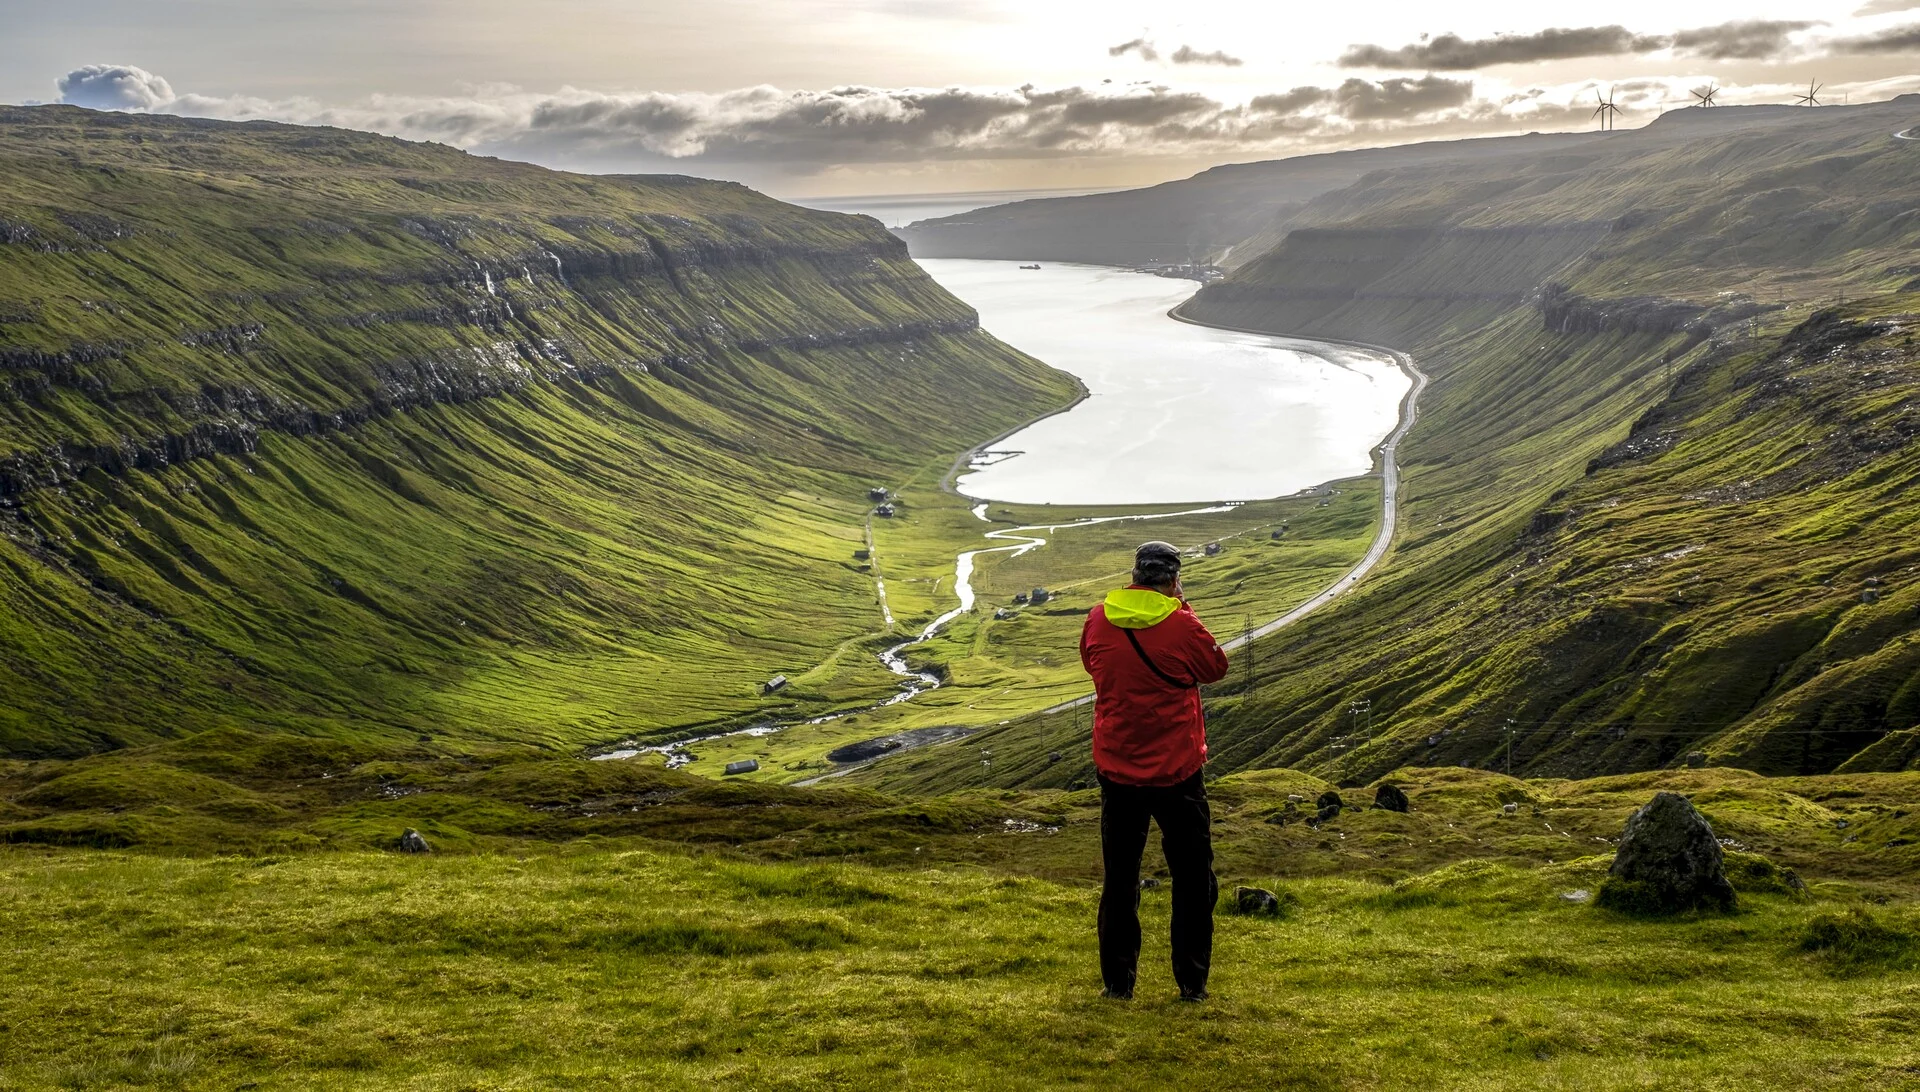 Guests taking a photo on a hike on the outskirts of Torshavn, Faroe Islands. Credit: Tommy Simonsen / HX Hurtigruten Expeditions